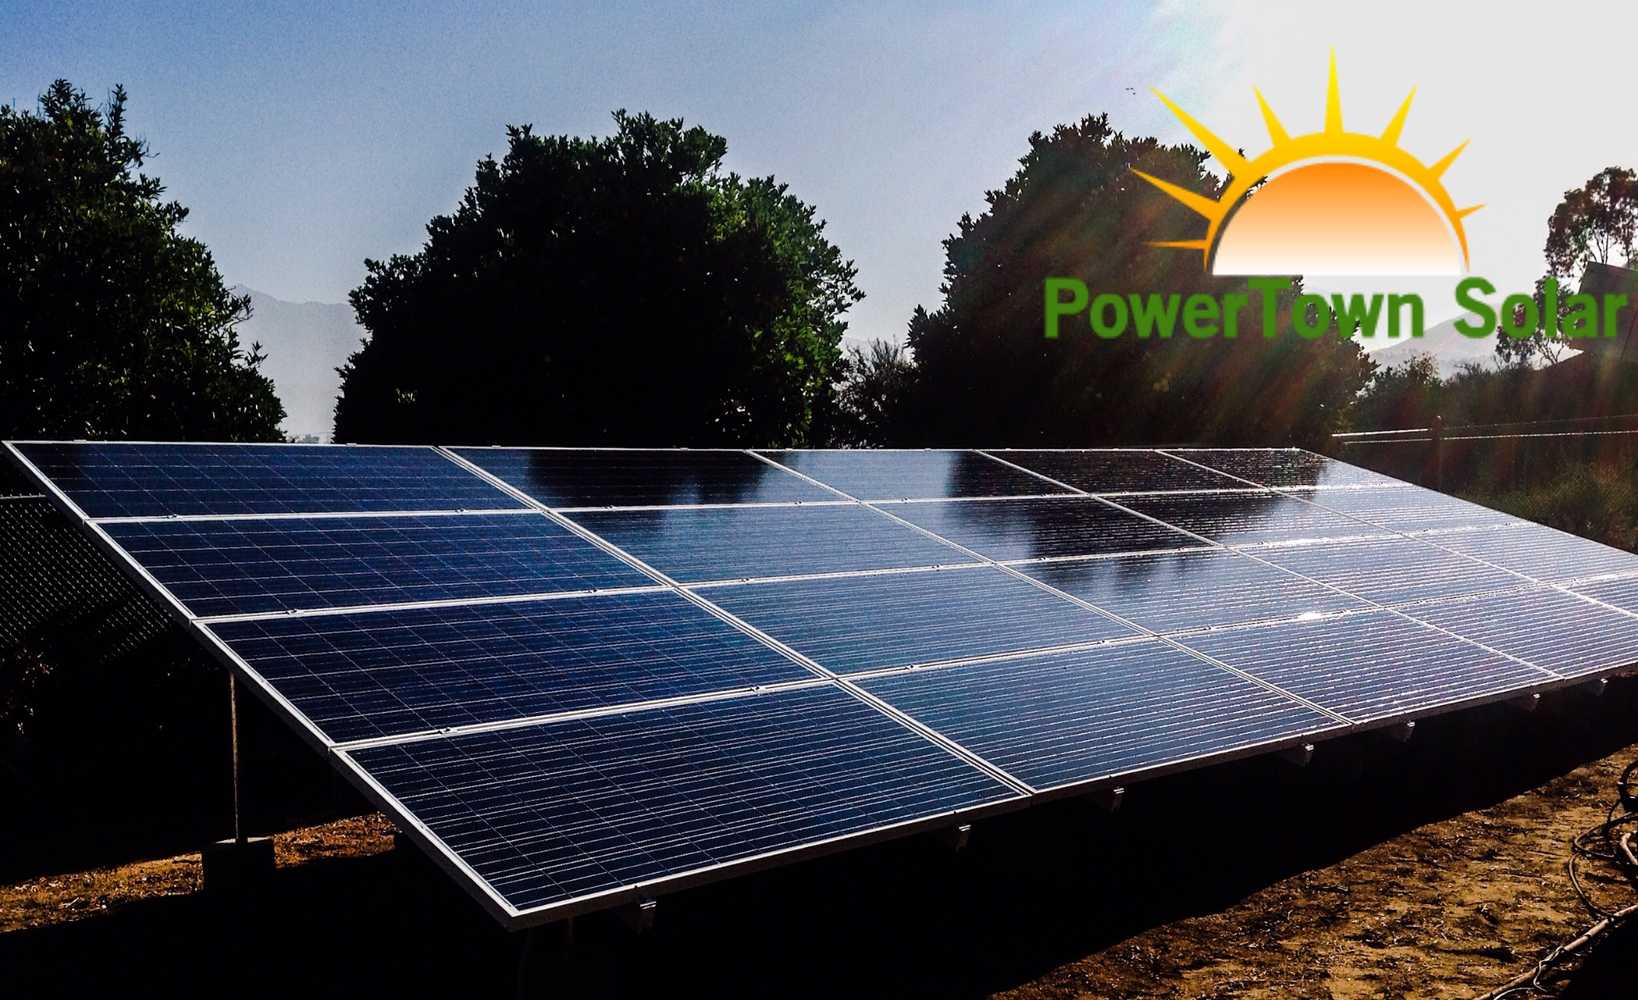 Photo(s) from PowerTown Solar